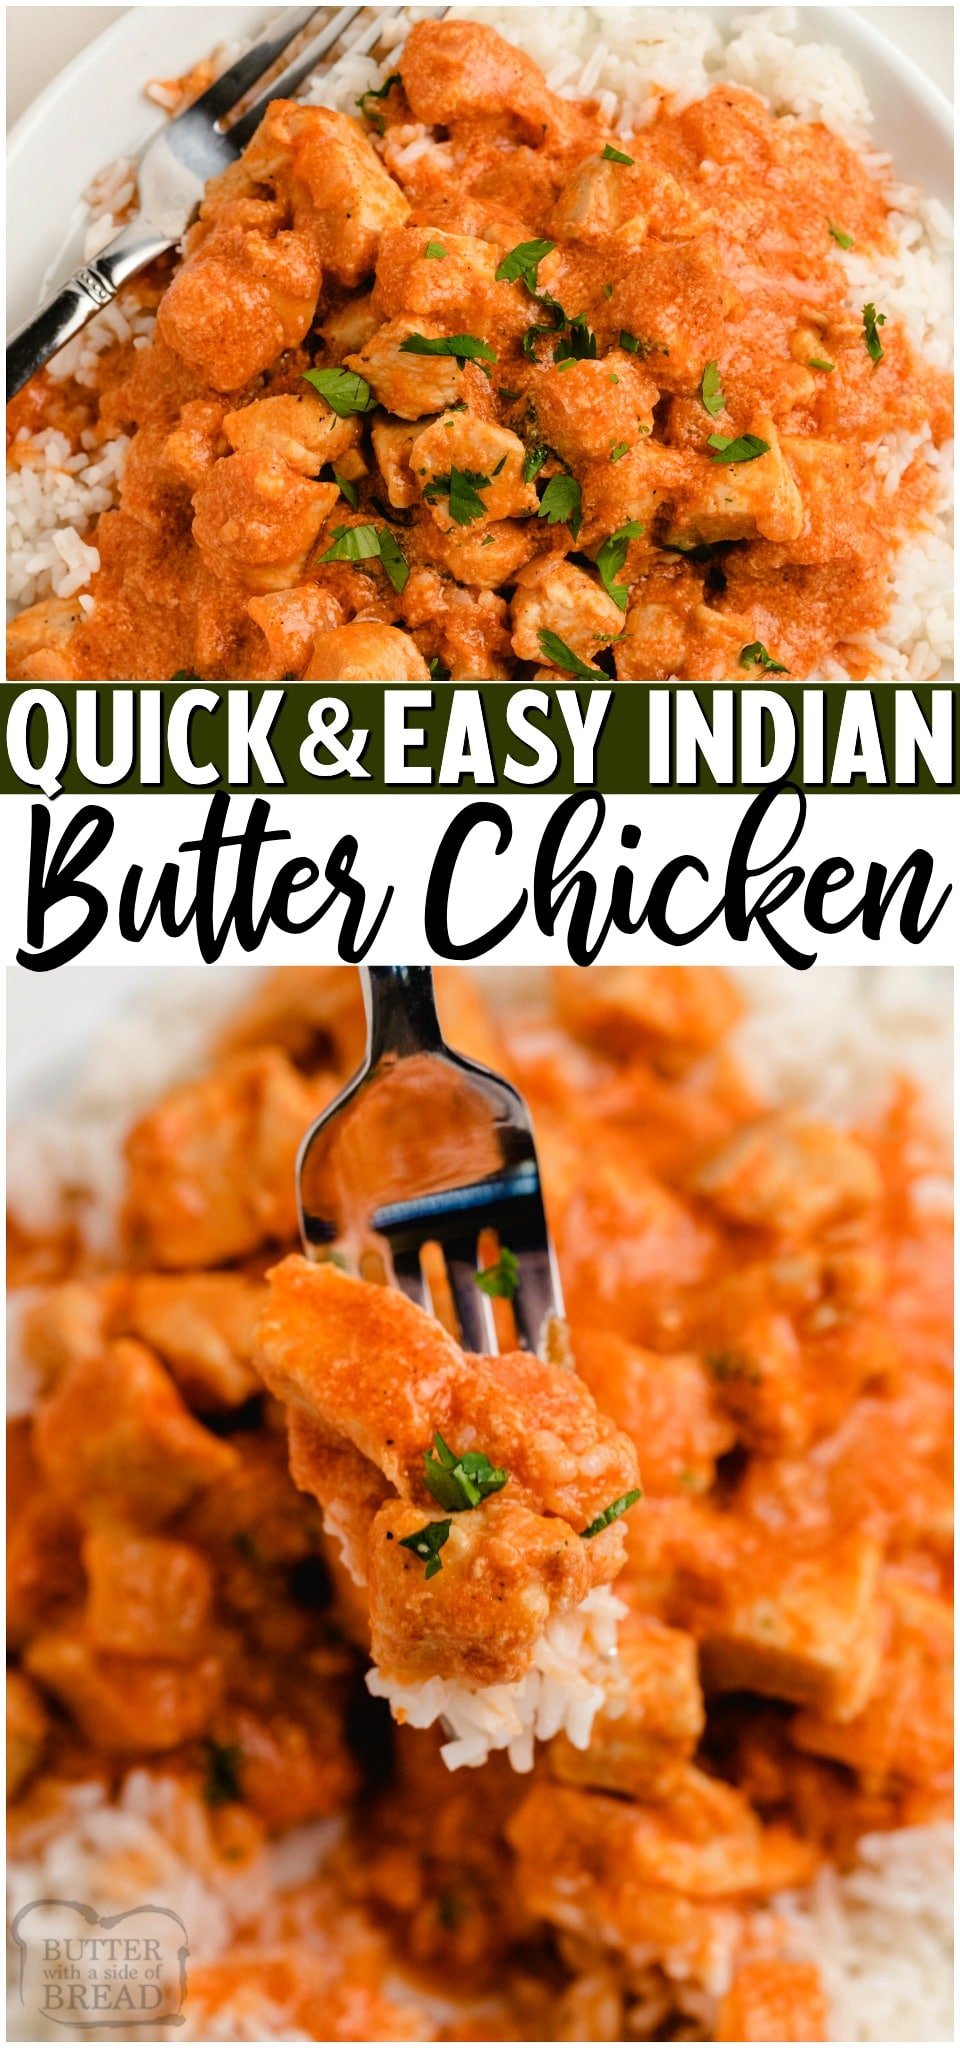 Easy Indian Butter chicken recipe made with a simple blend of spices, onion, garlic, tender chicken, tomato sauce & butter, of course! Serve this flavorful Butter chicken over rice with a side of naan! #chicken #maindish #dinner #Indian #Butter #easyrecipe from BUTTER WITH A SIDE OF BREAD